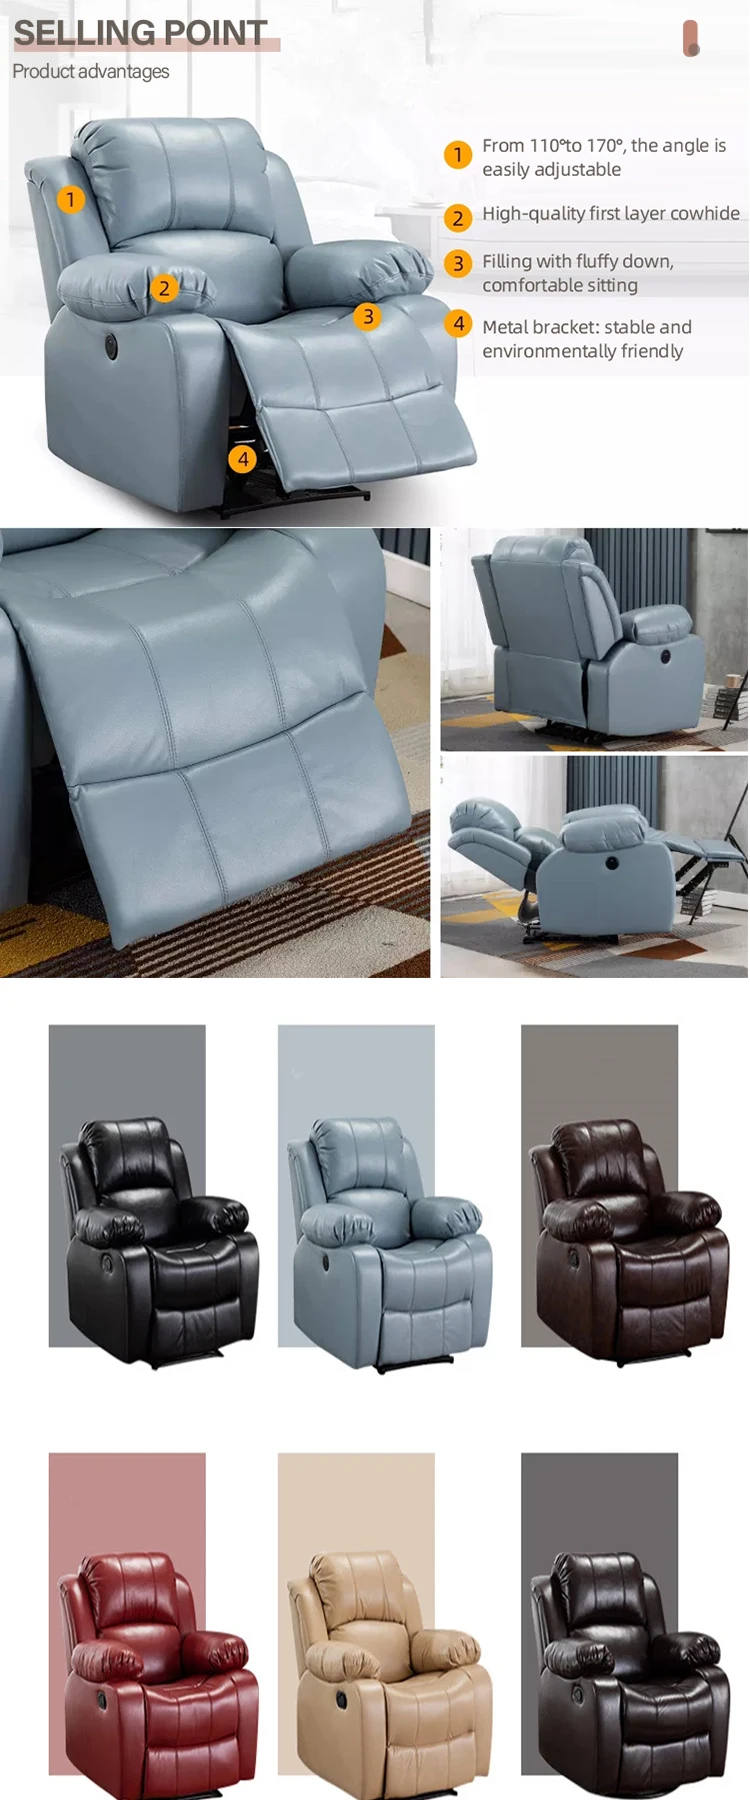 YASITE Hot selling Modern Recliner Leather Single Sofa for Living Room